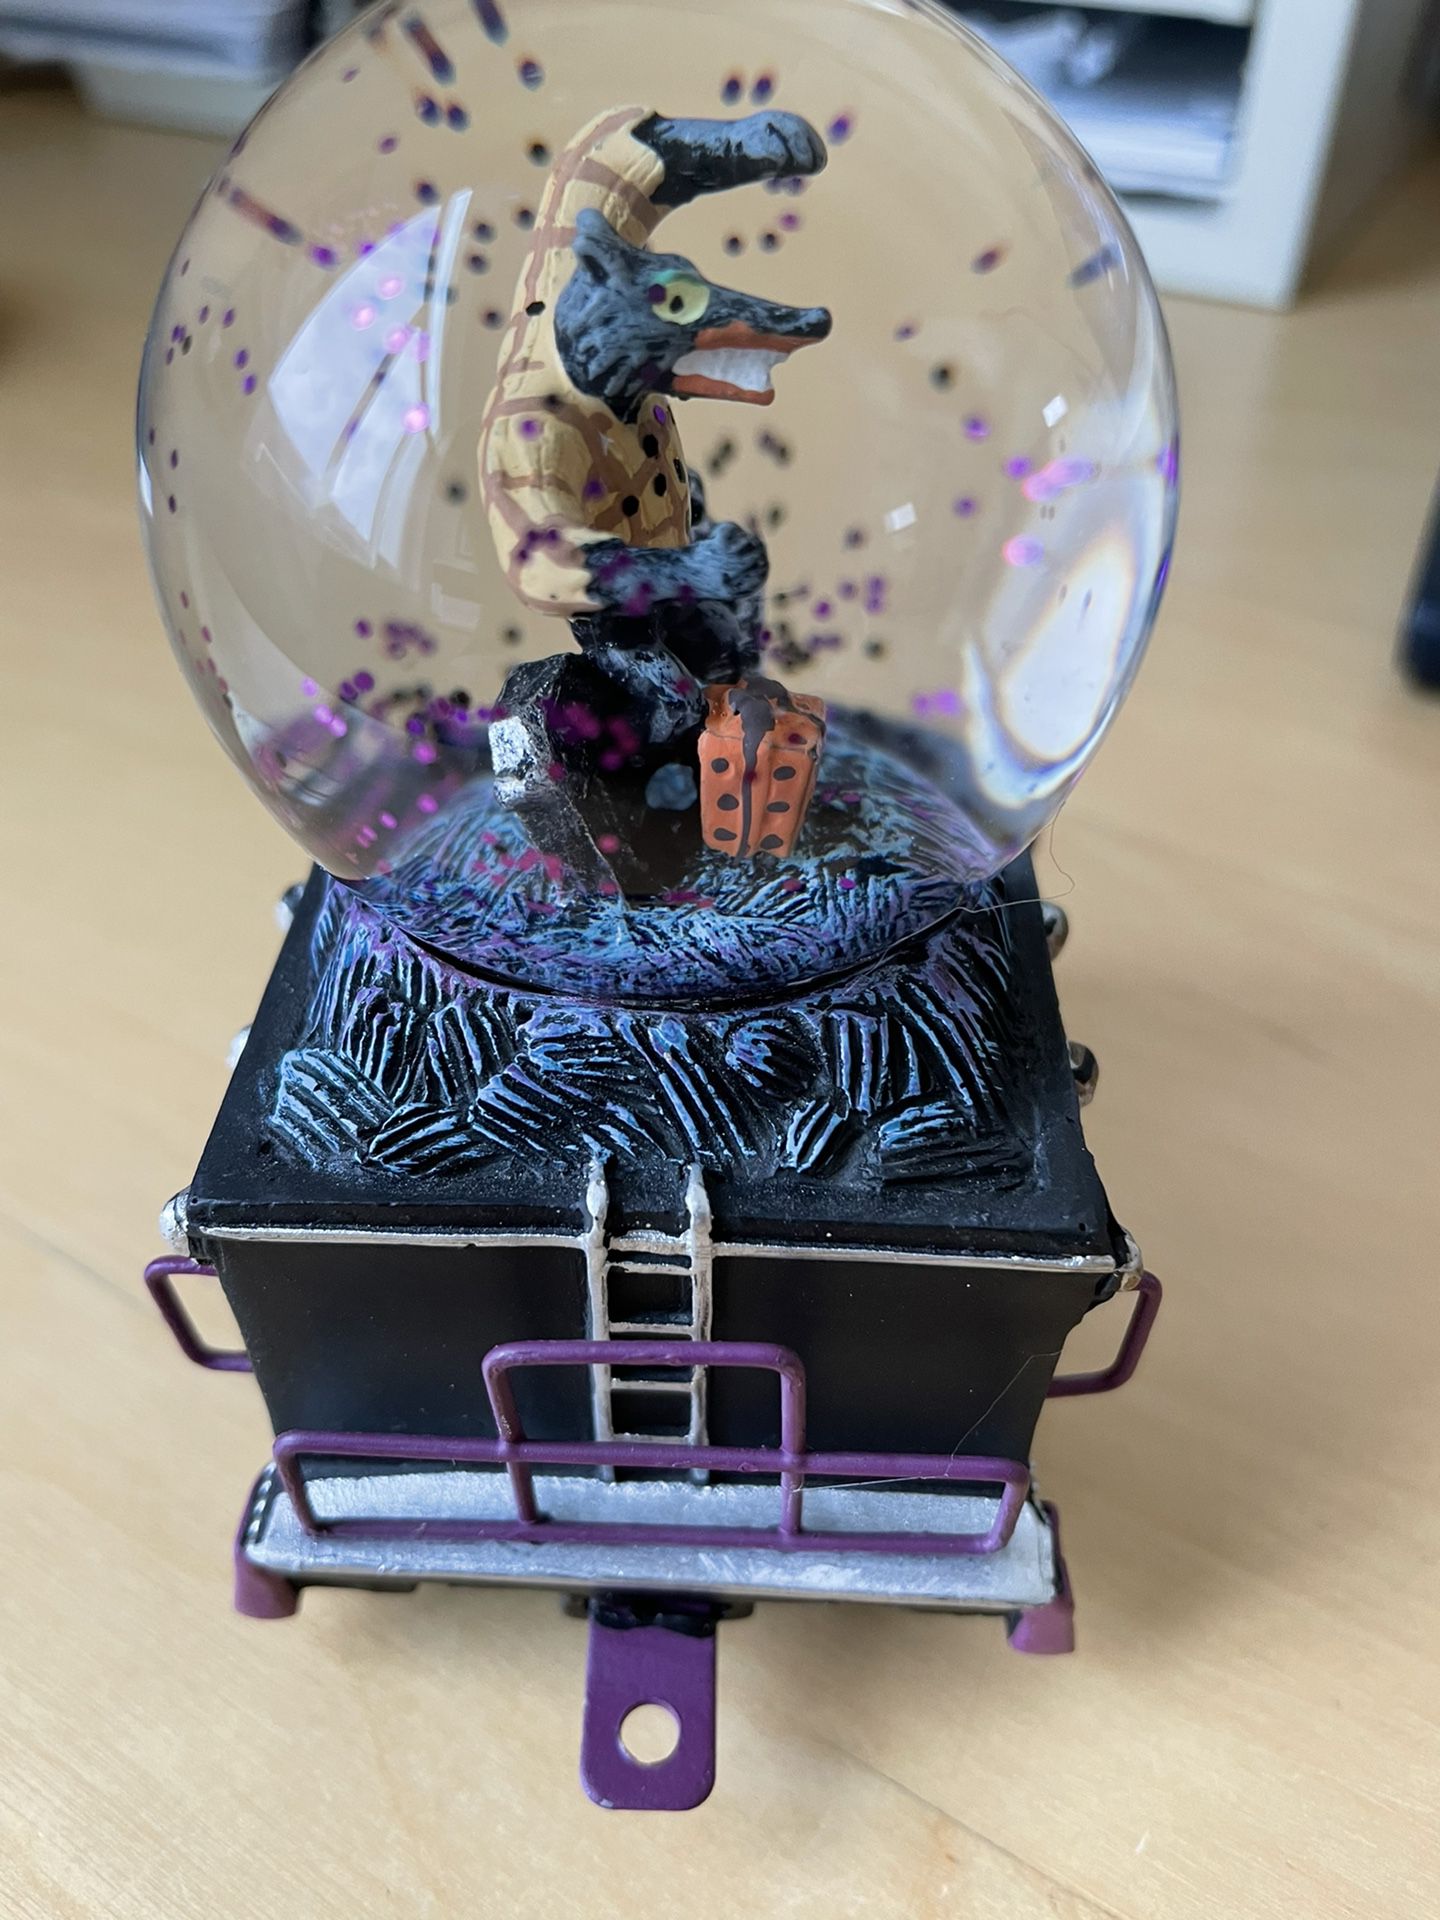 The Nightmare Before Christmas Glitter Globe Collection 